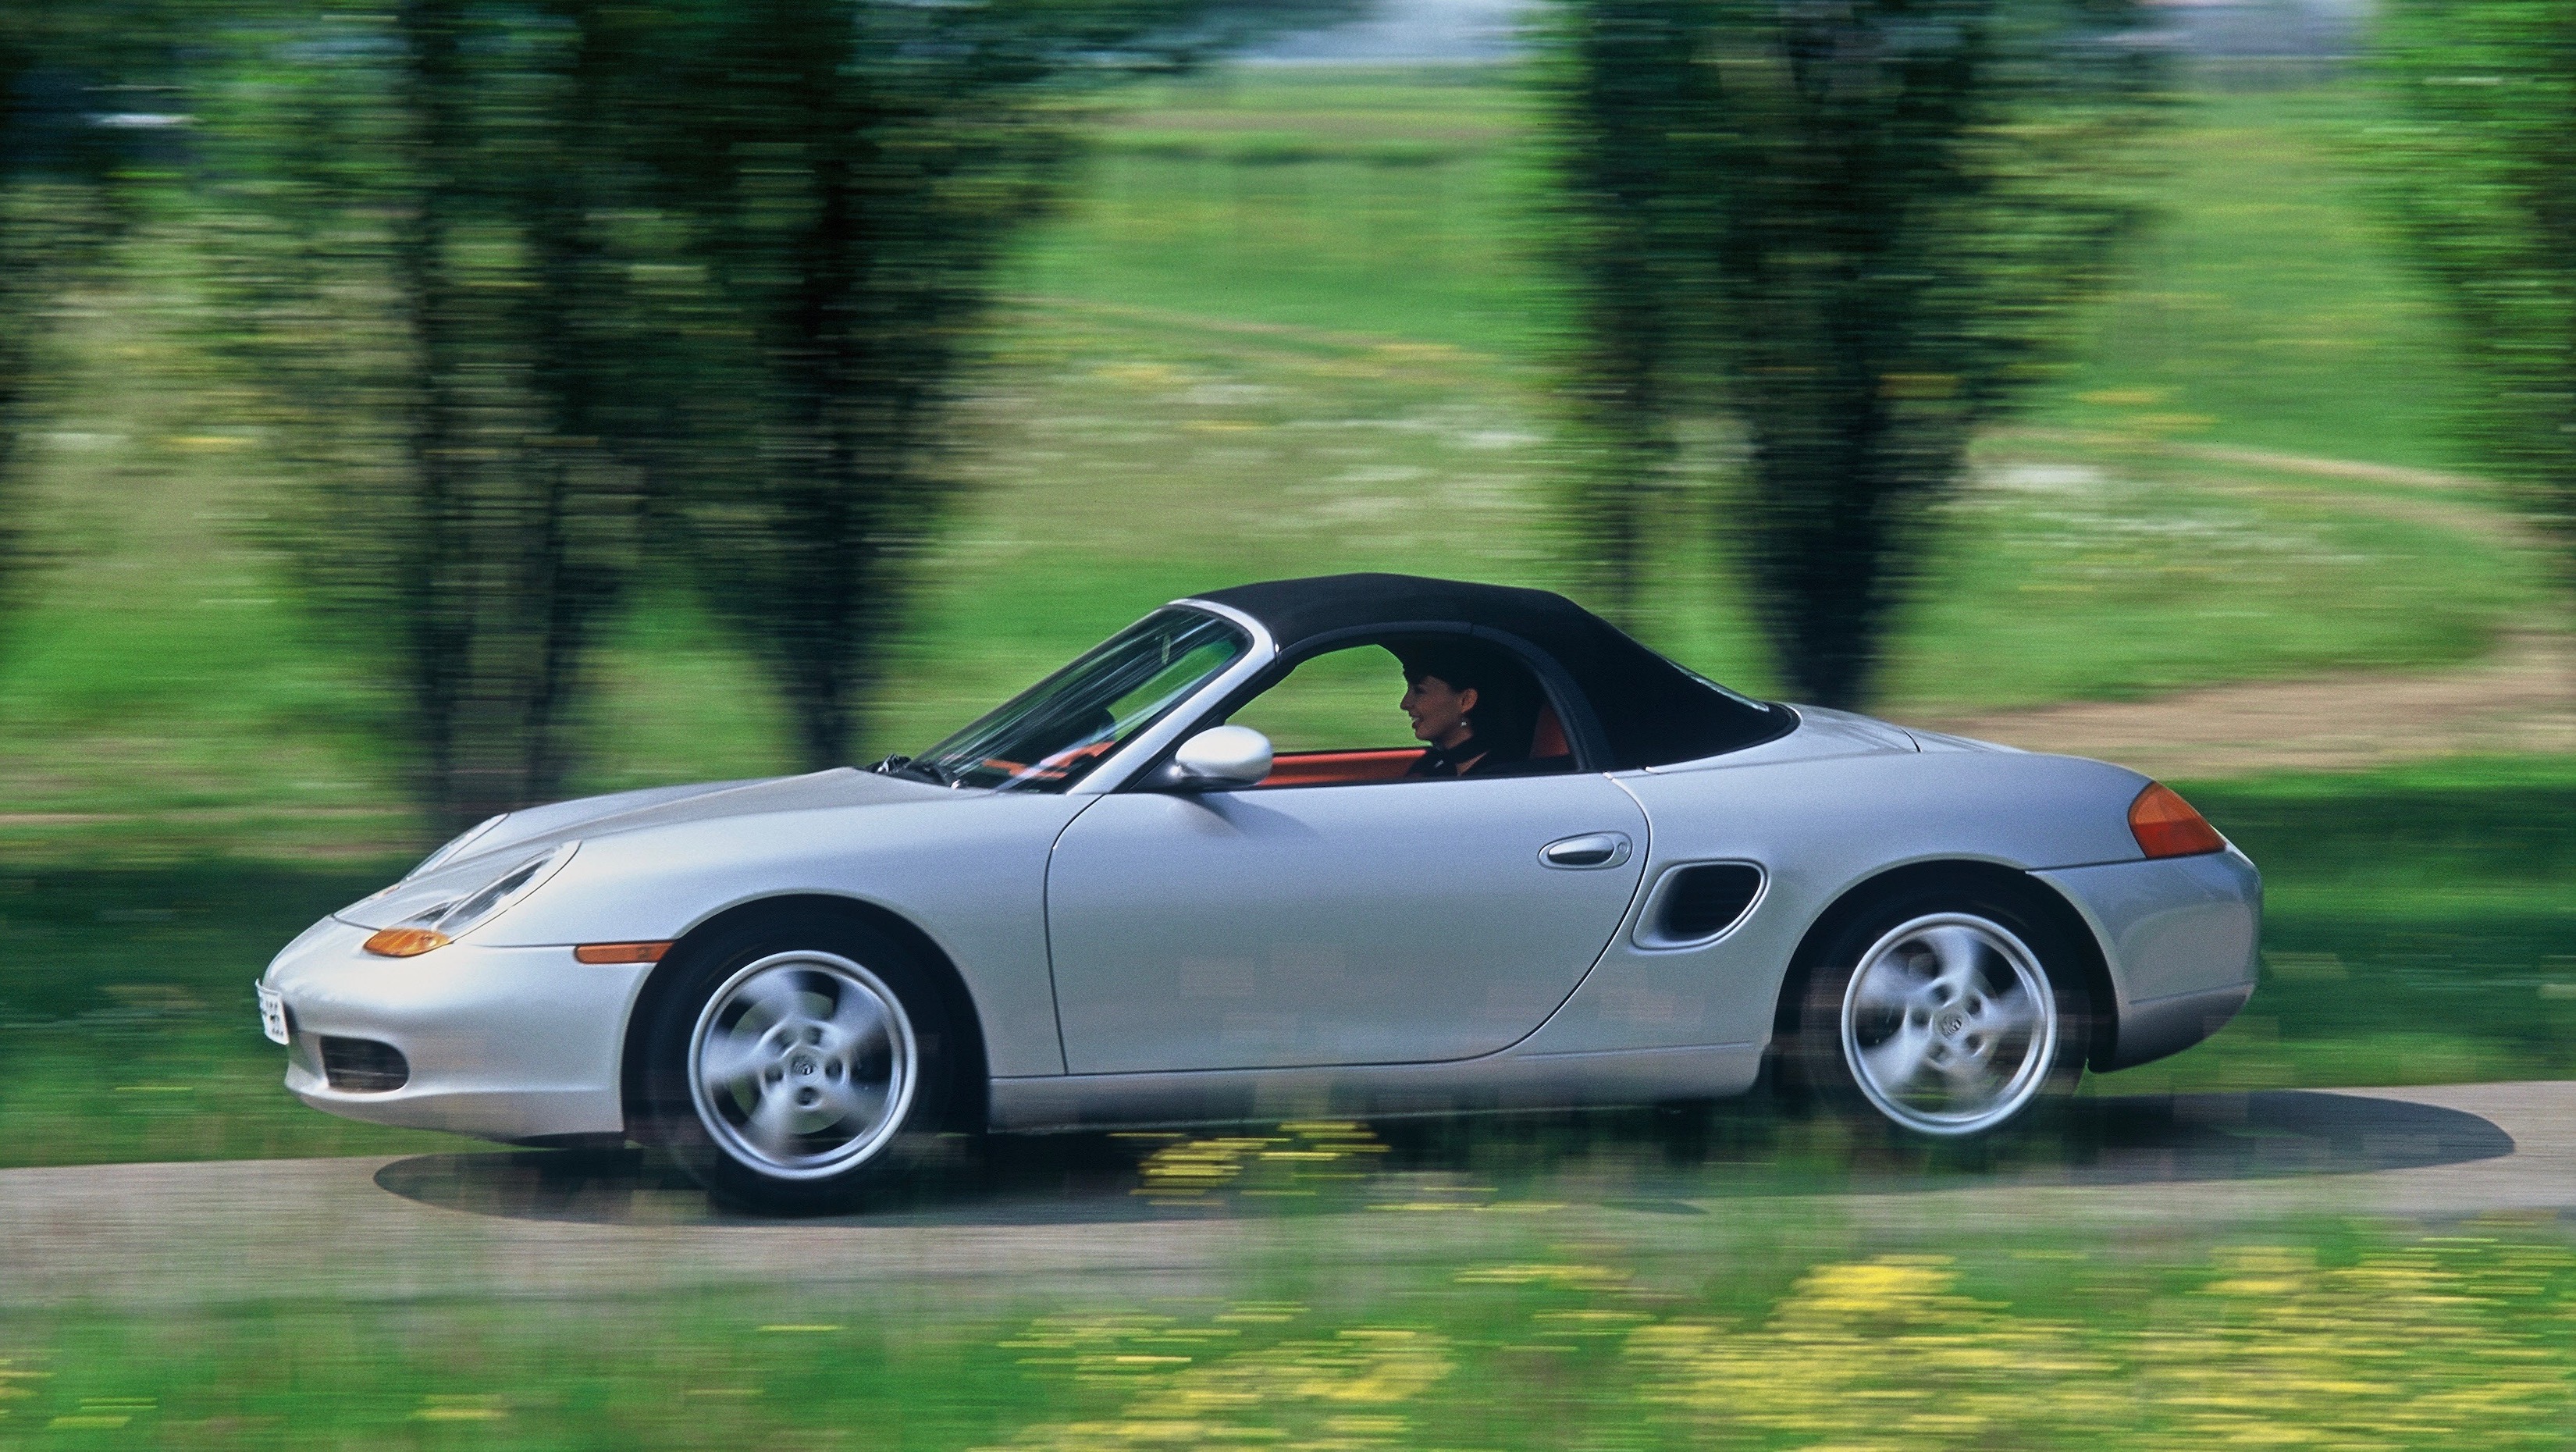 Mk1 Porsche Boxster with roof up driving along tree-lined road